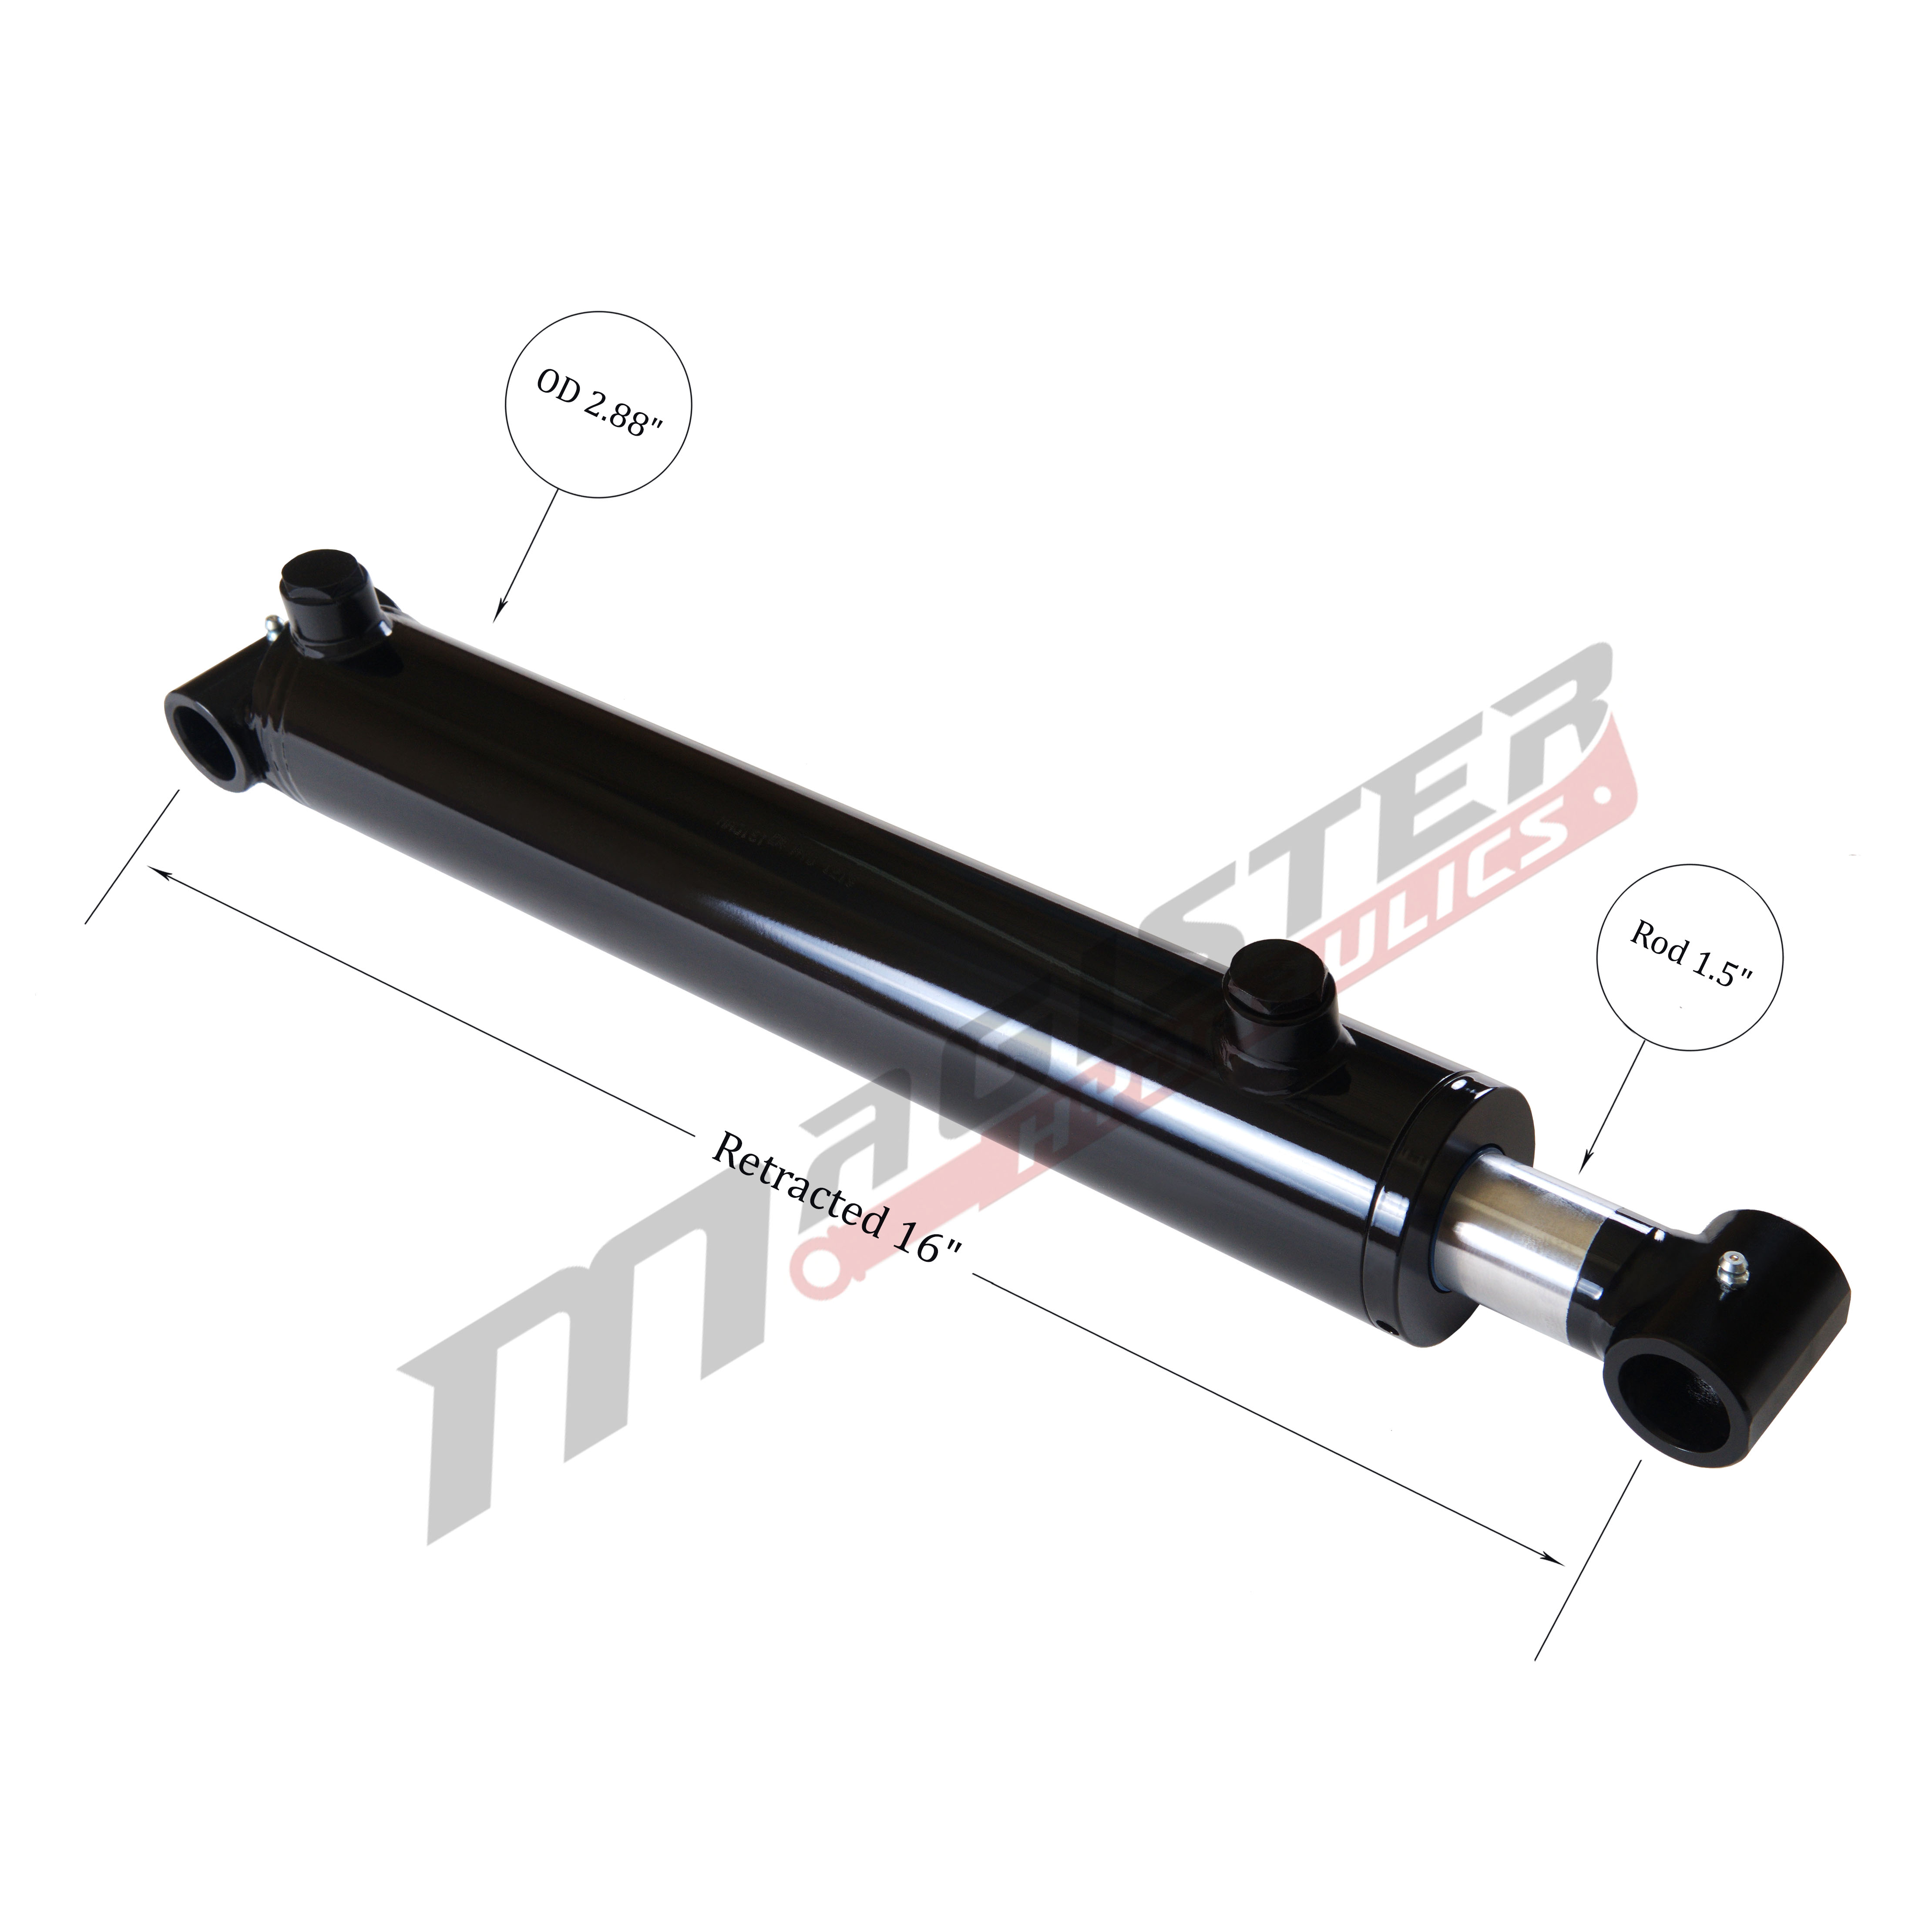 2.5 bore x 8 stroke hydraulic cylinder, welded cross tube double acting cylinder | Magister Hydraulics